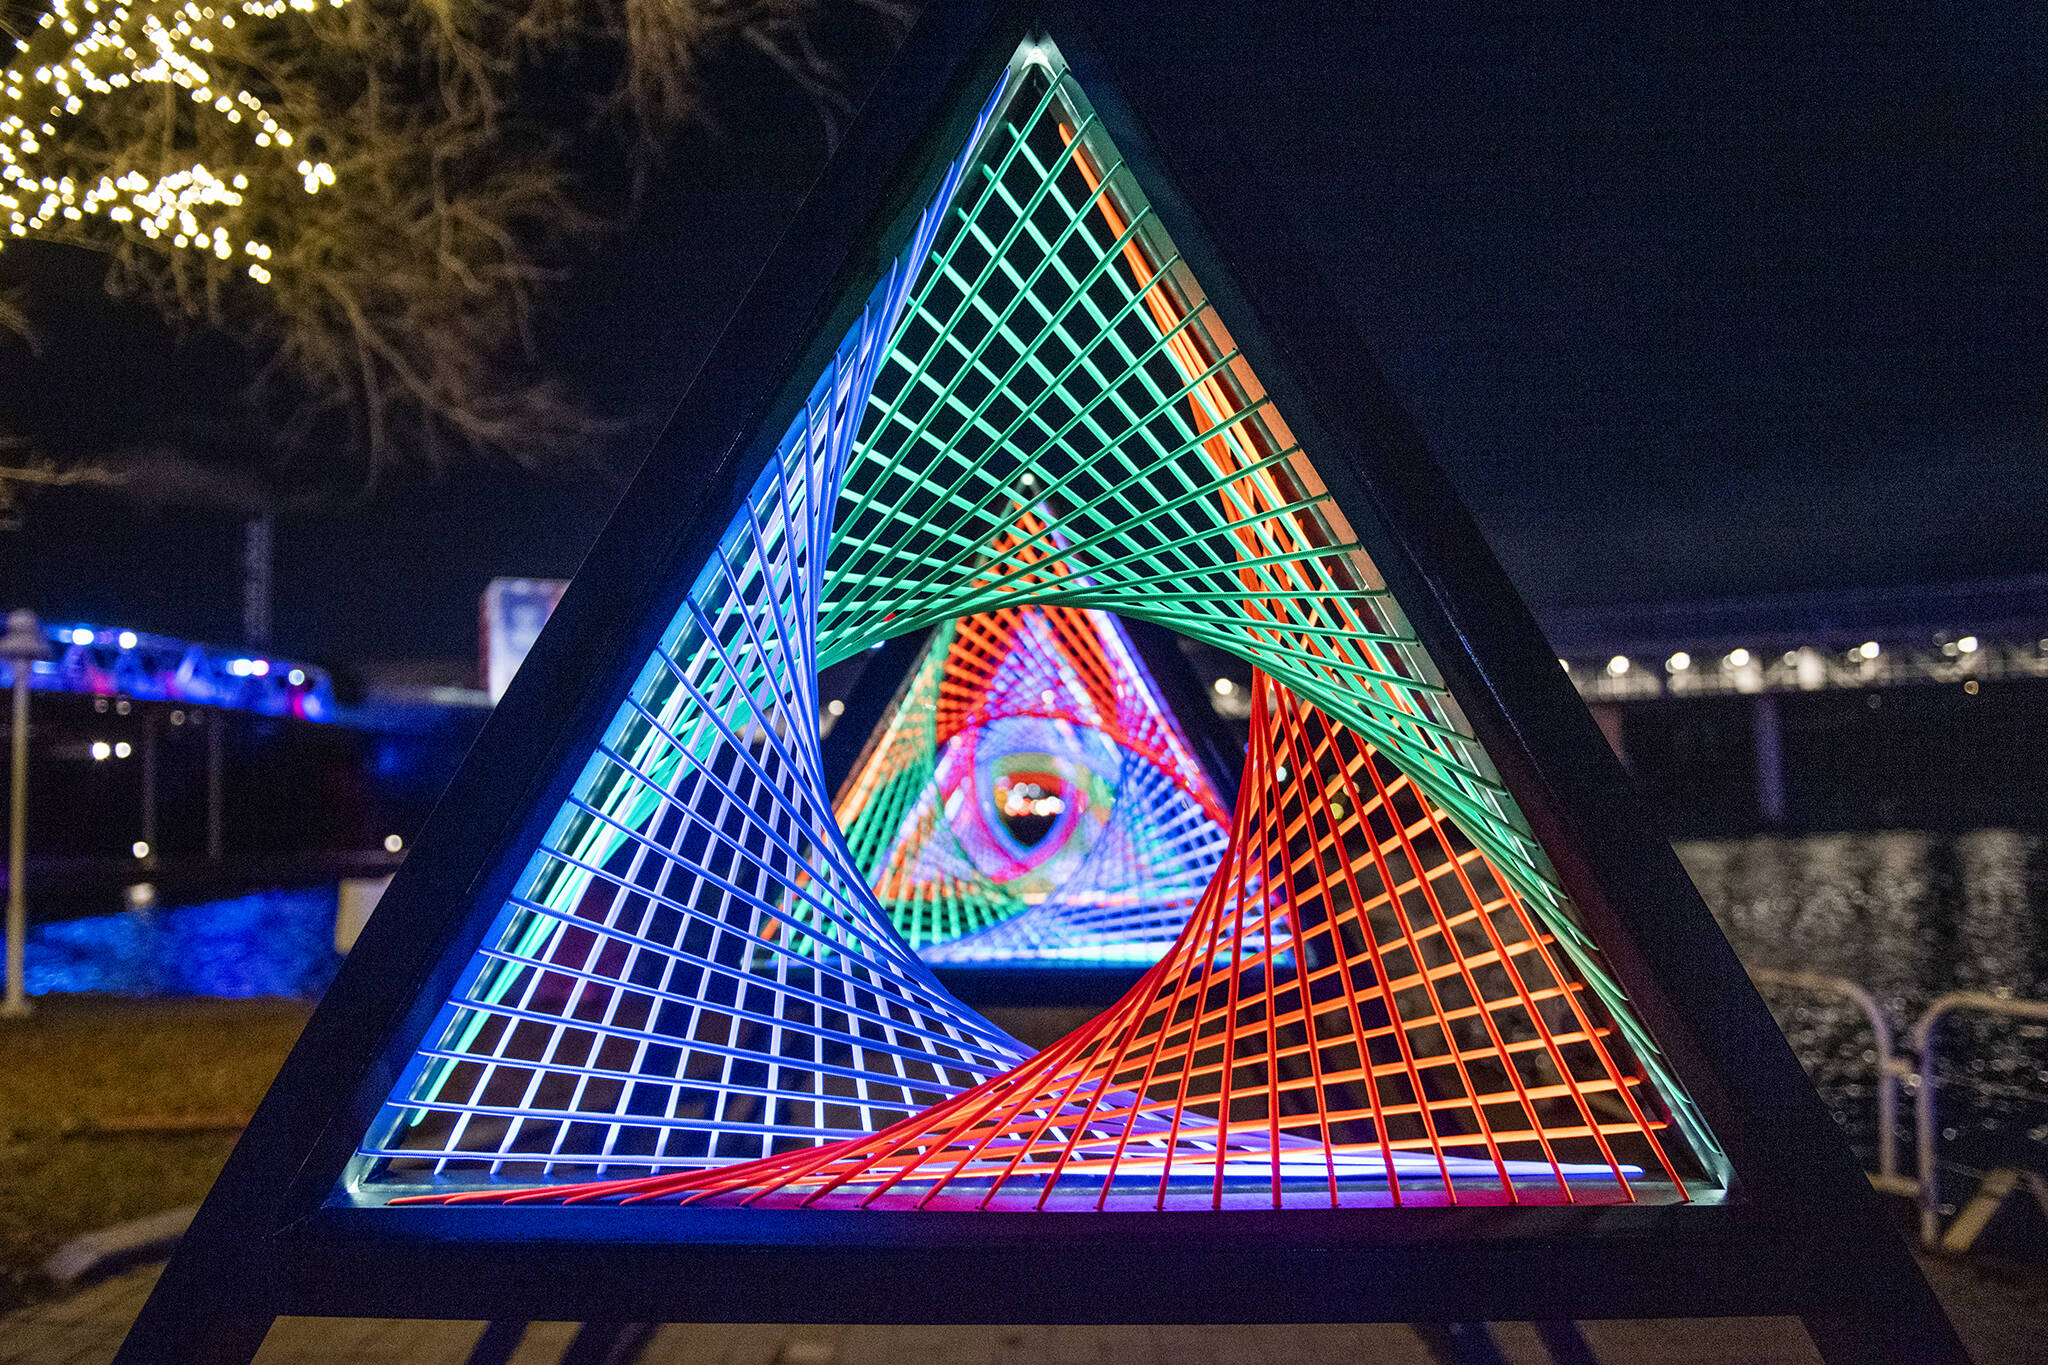 Here's what the winter lights festival at Ontario Place looks like